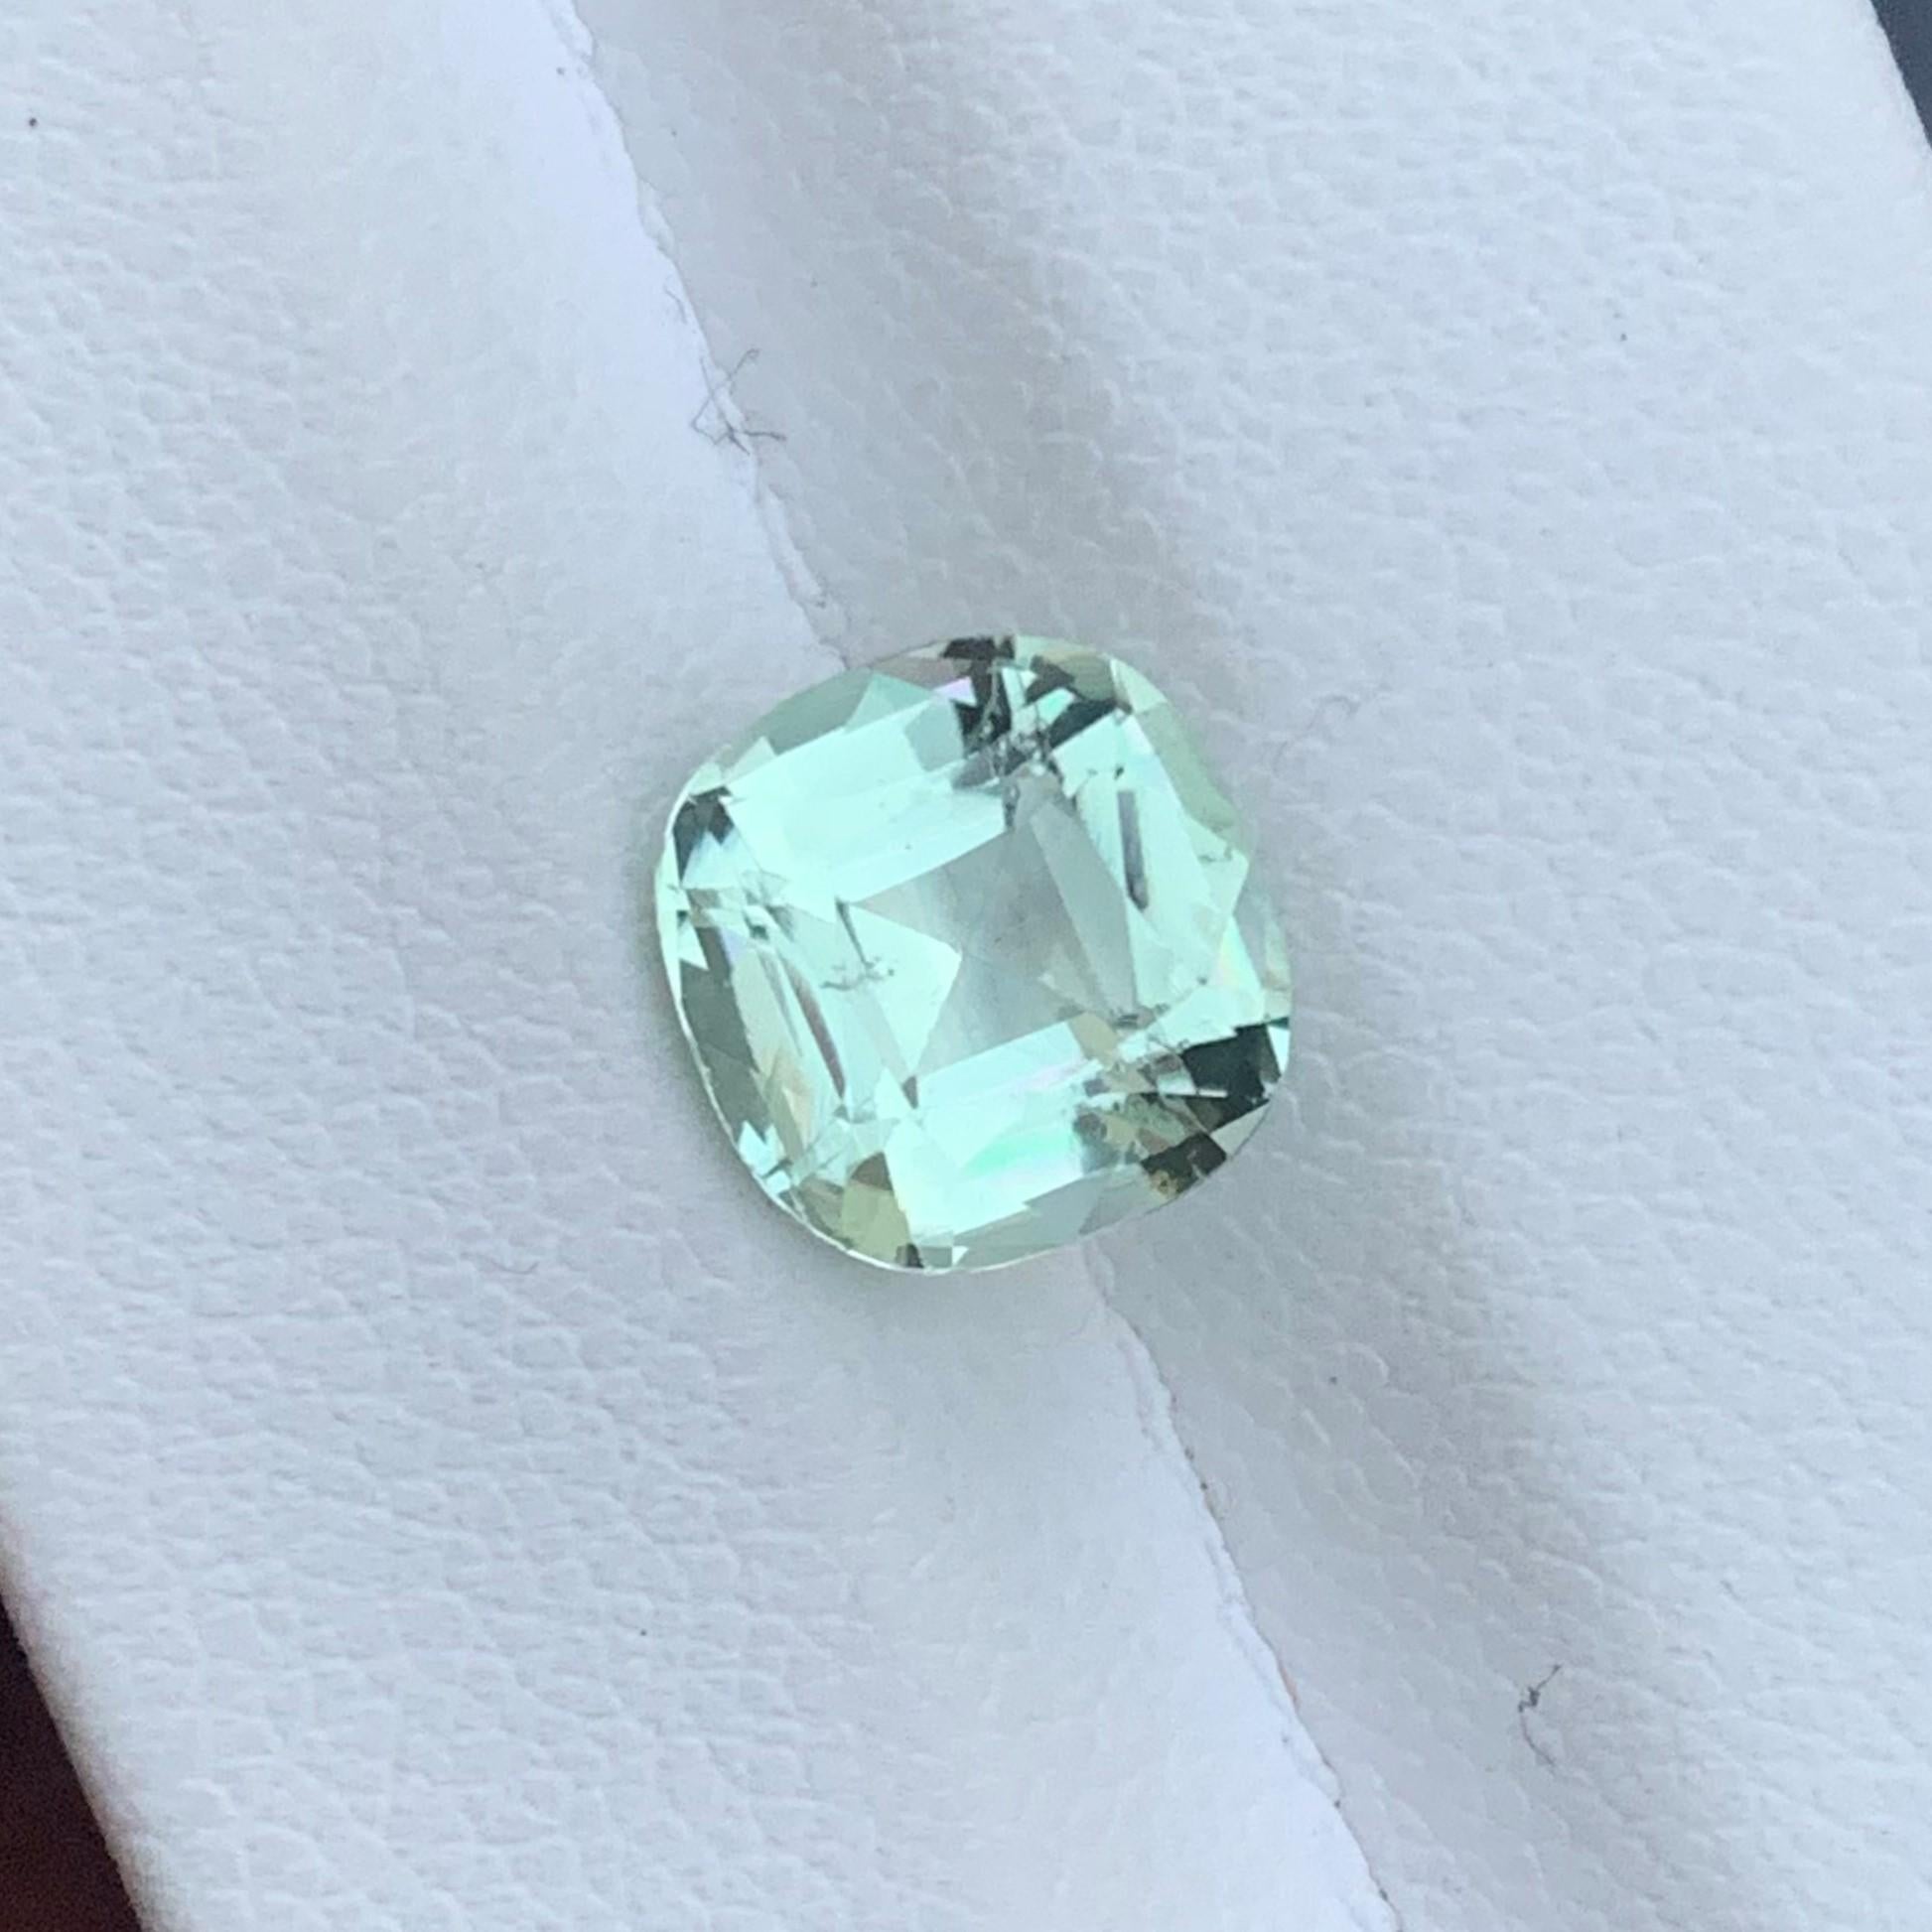 Gemstone Type : Tourmaline
Weight : 2.70 Carats
Dimensions : 8.8x8.5x5.6 Mm
Origin : Kunar Afghanistan
Clarity : SI
Shape: Cushion
Color: Mint Green
Certificate: On Demand
Basically, mint tourmalines are tourmalines with pastel hues of light green